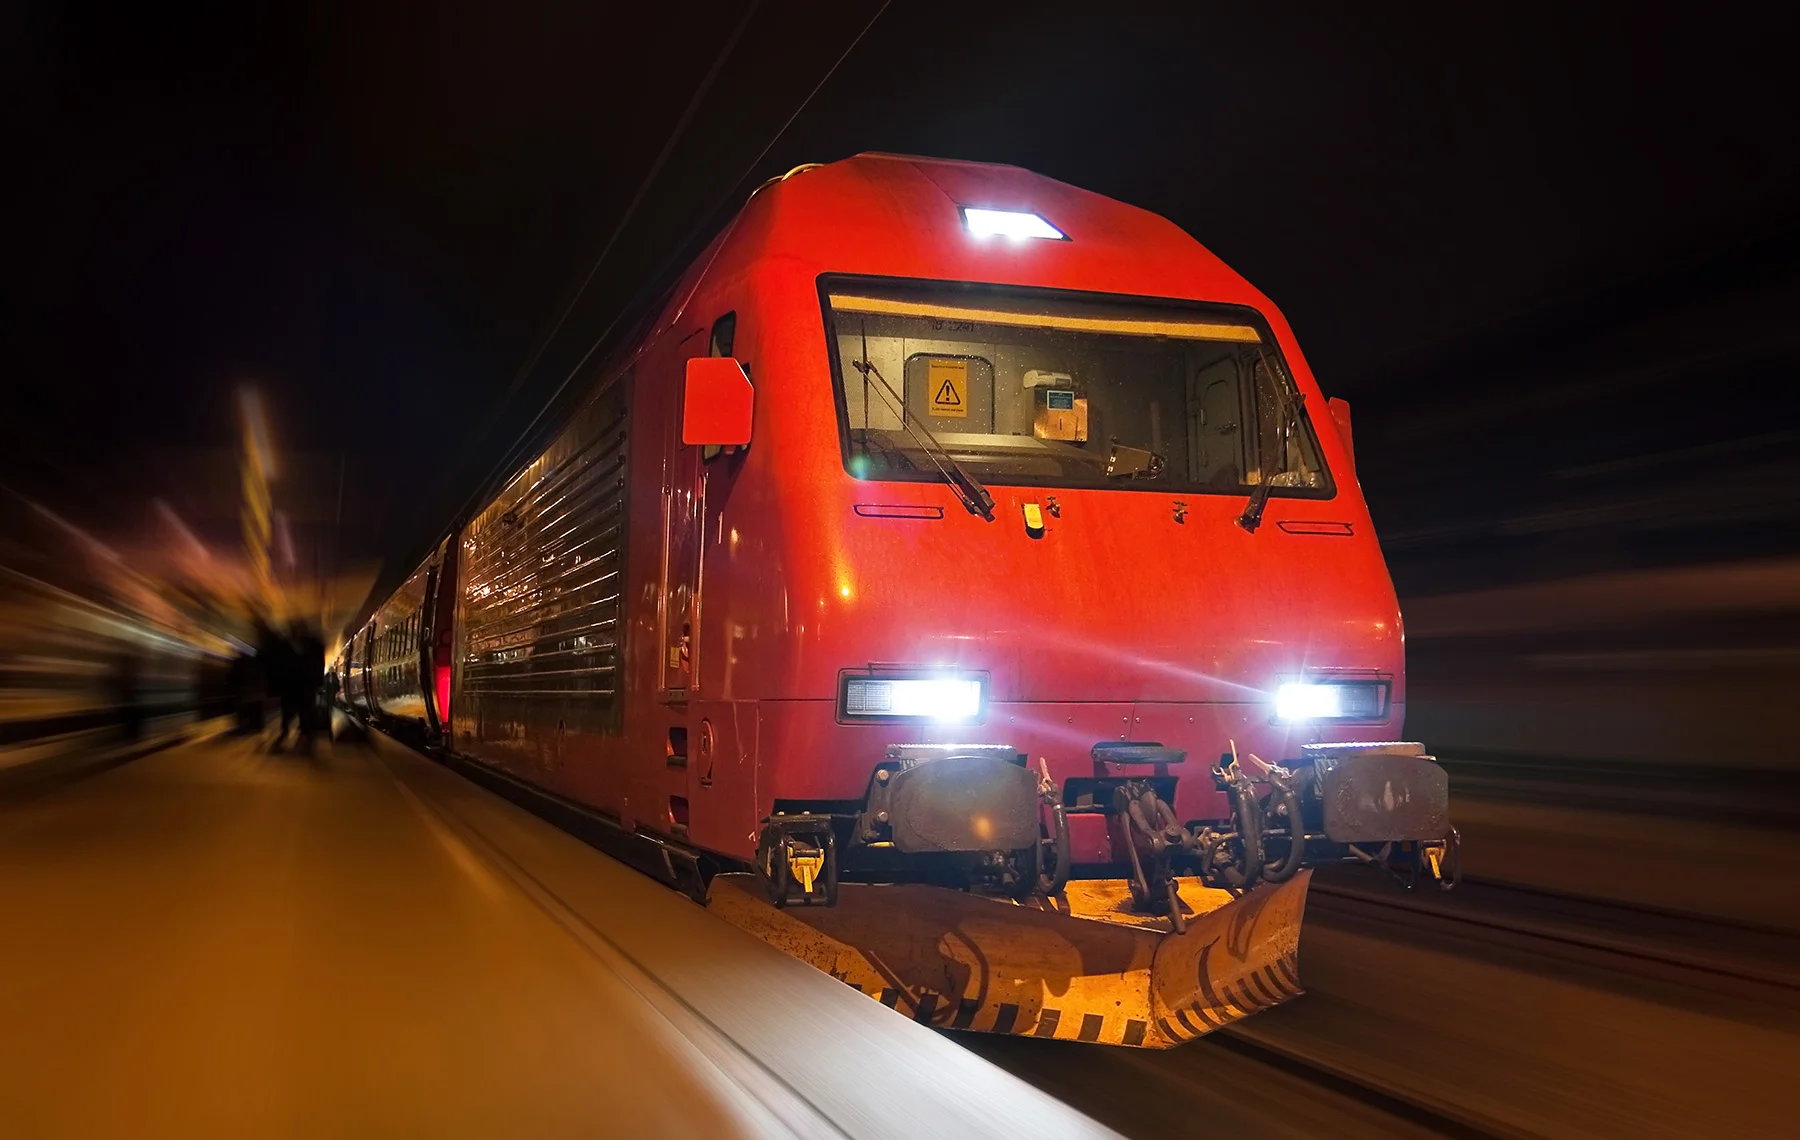 Night train at a station in Norway